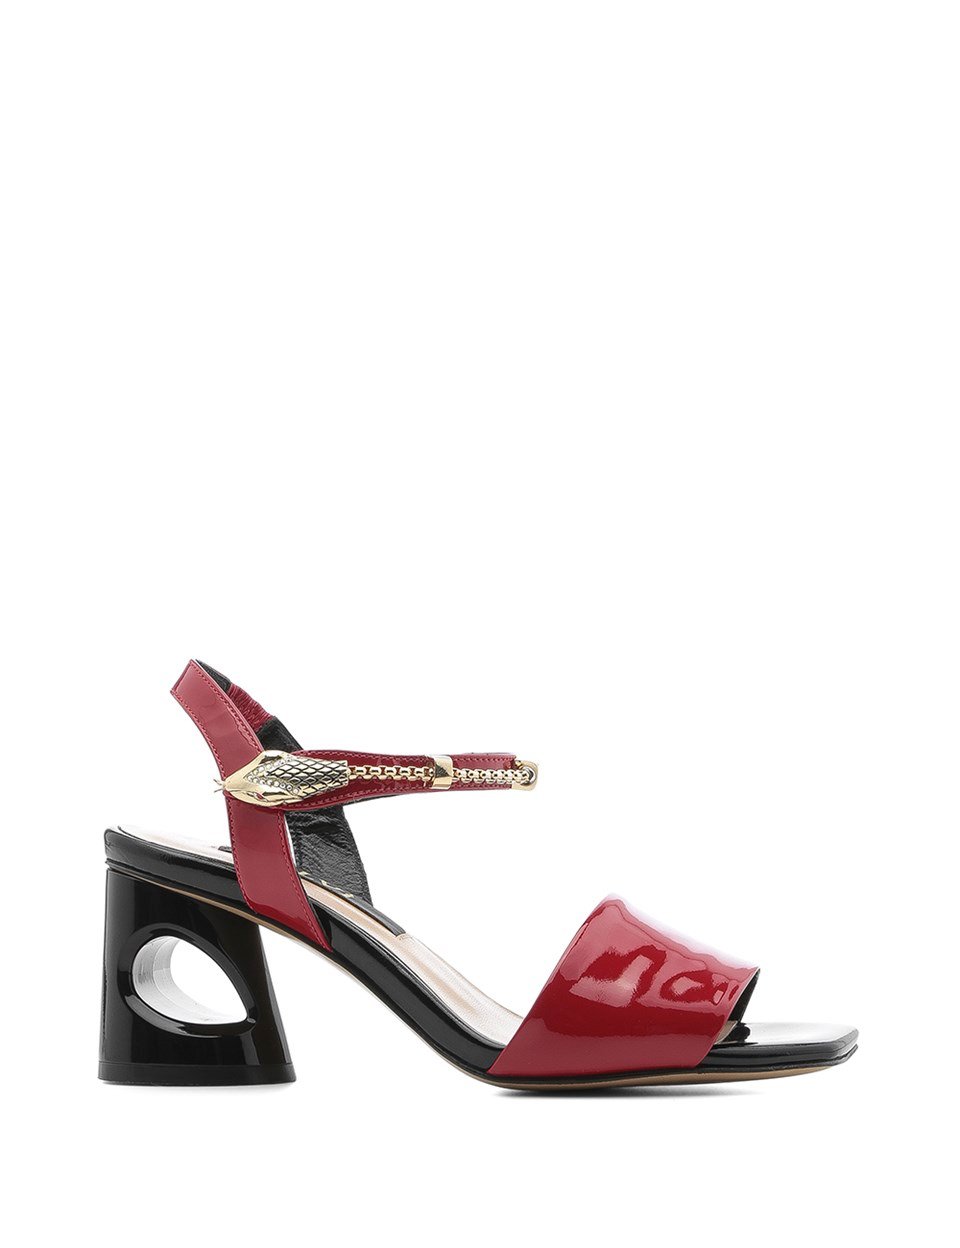 red patent leather sandal heels